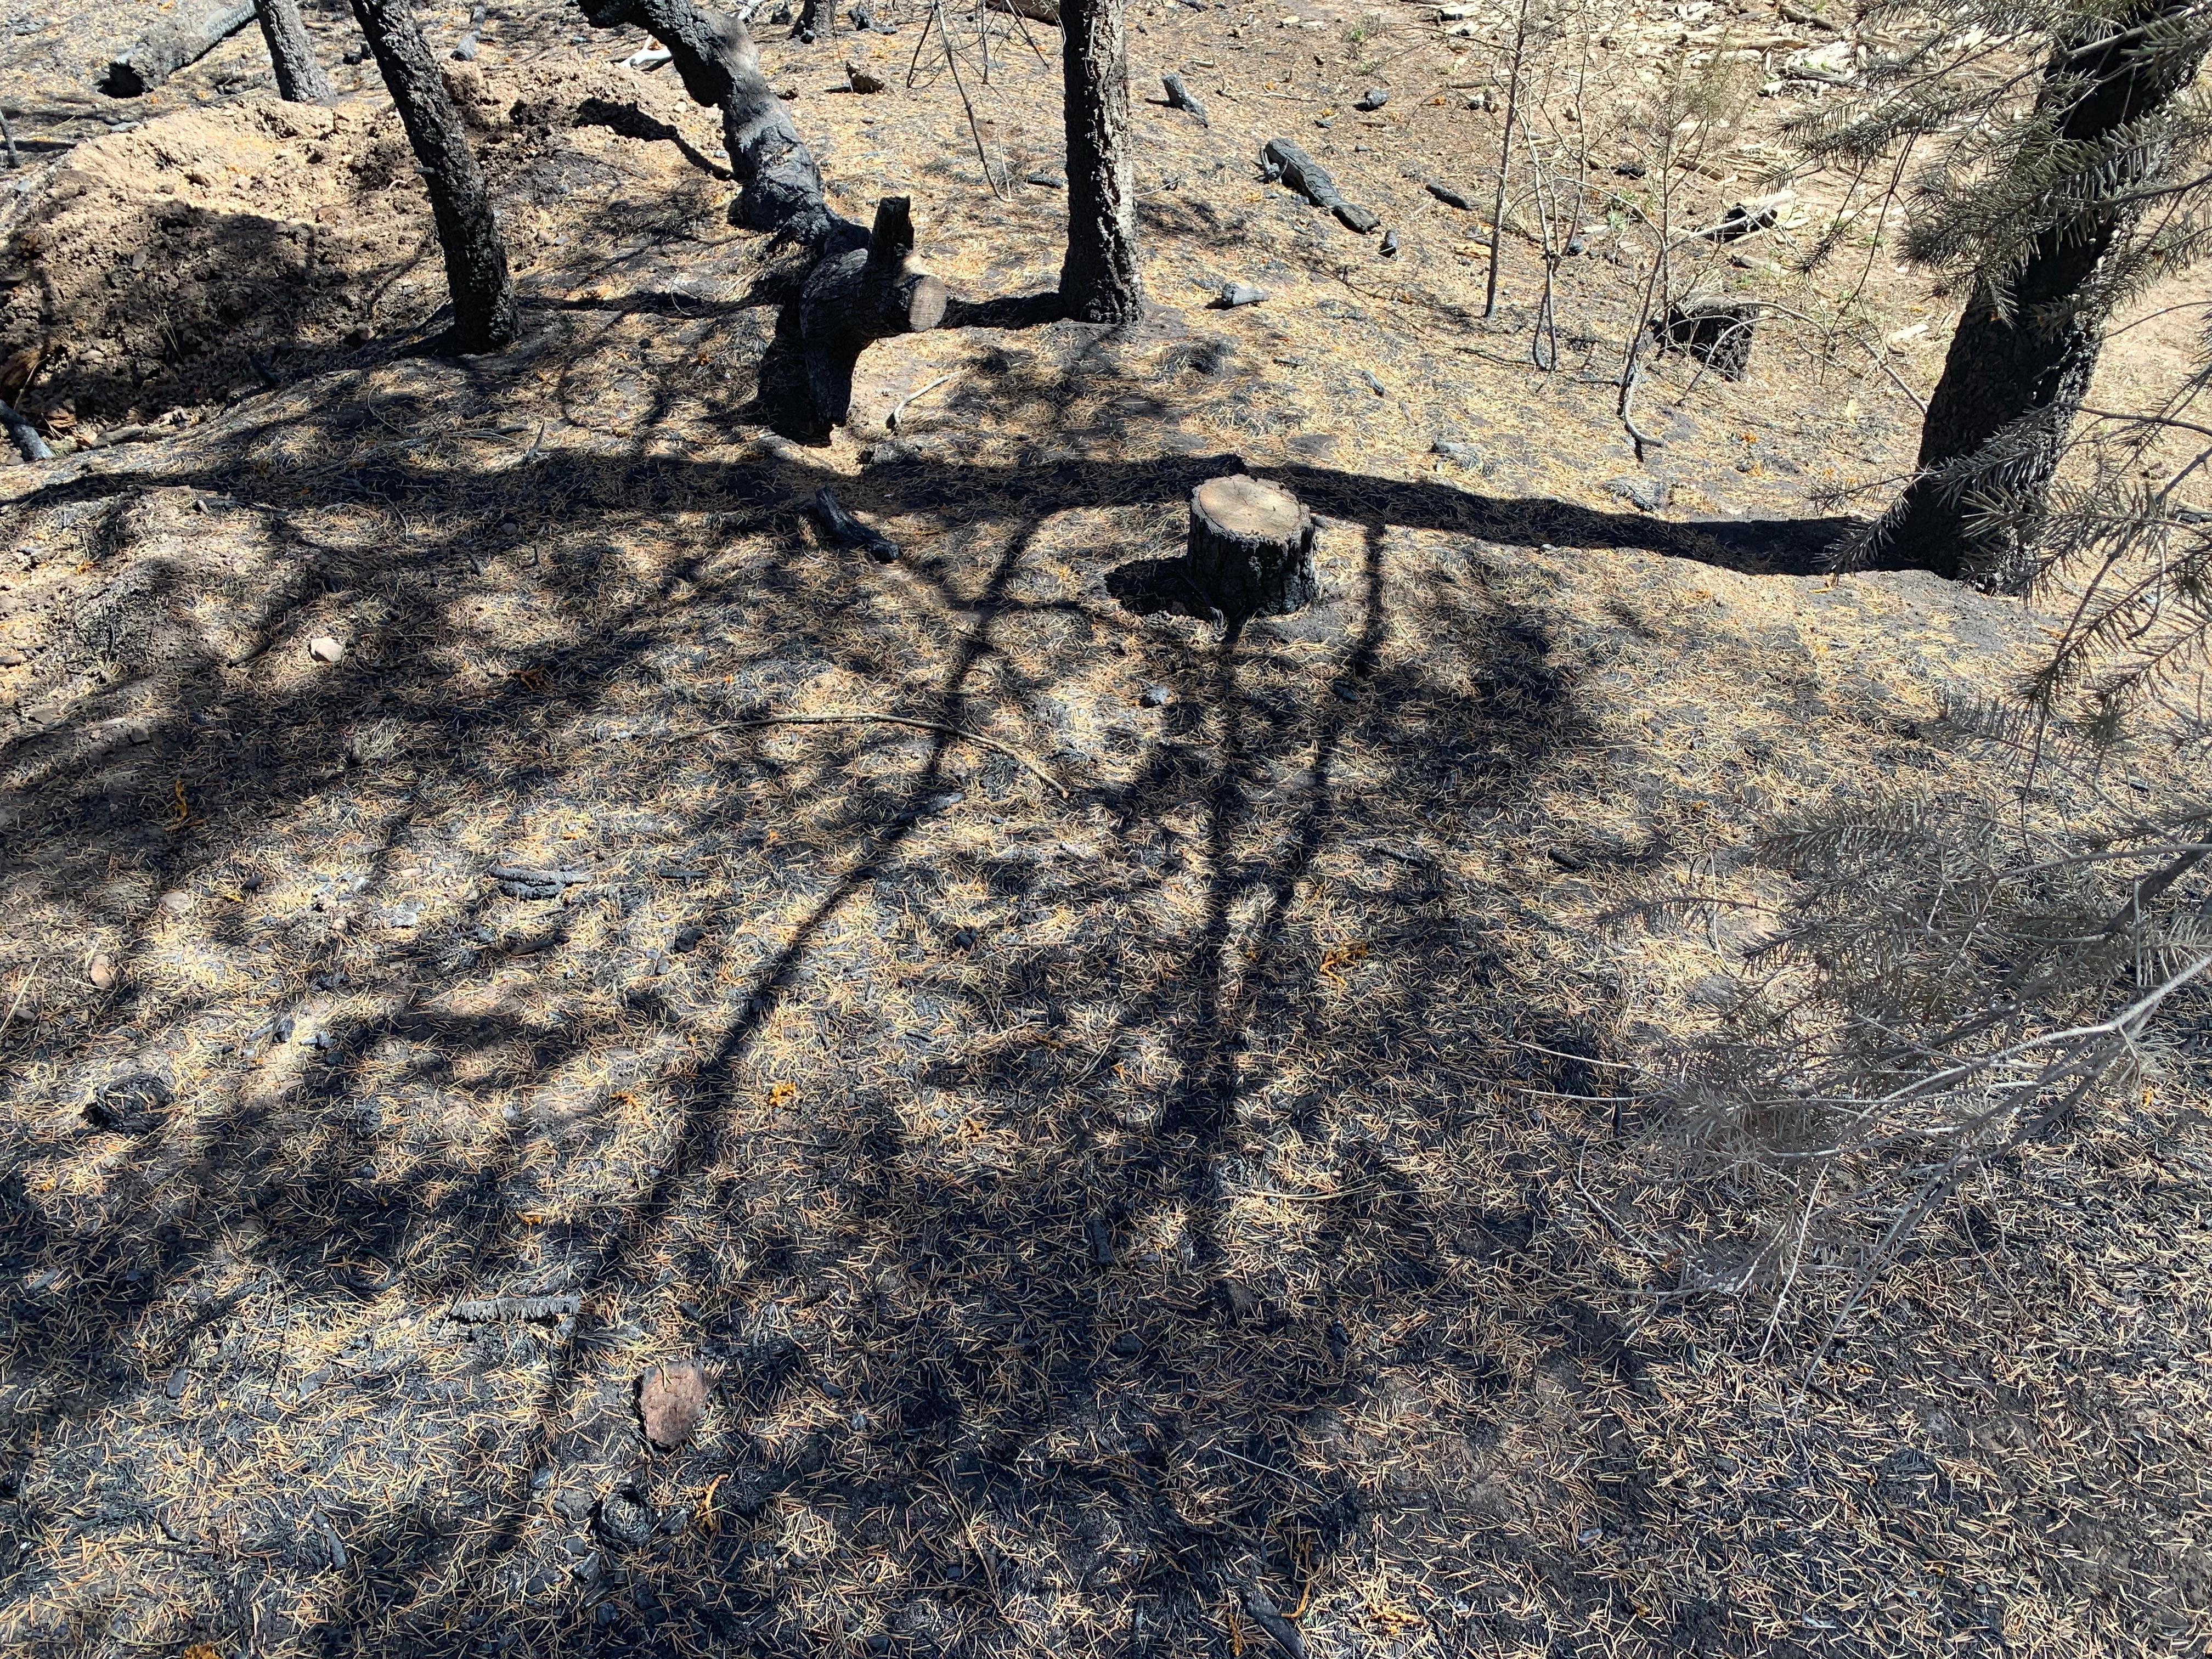 Photo shows the ground starting to be covered with needles that have fallen off neighboring trees. Showing the ground cover starting to recover within days of the fire. 